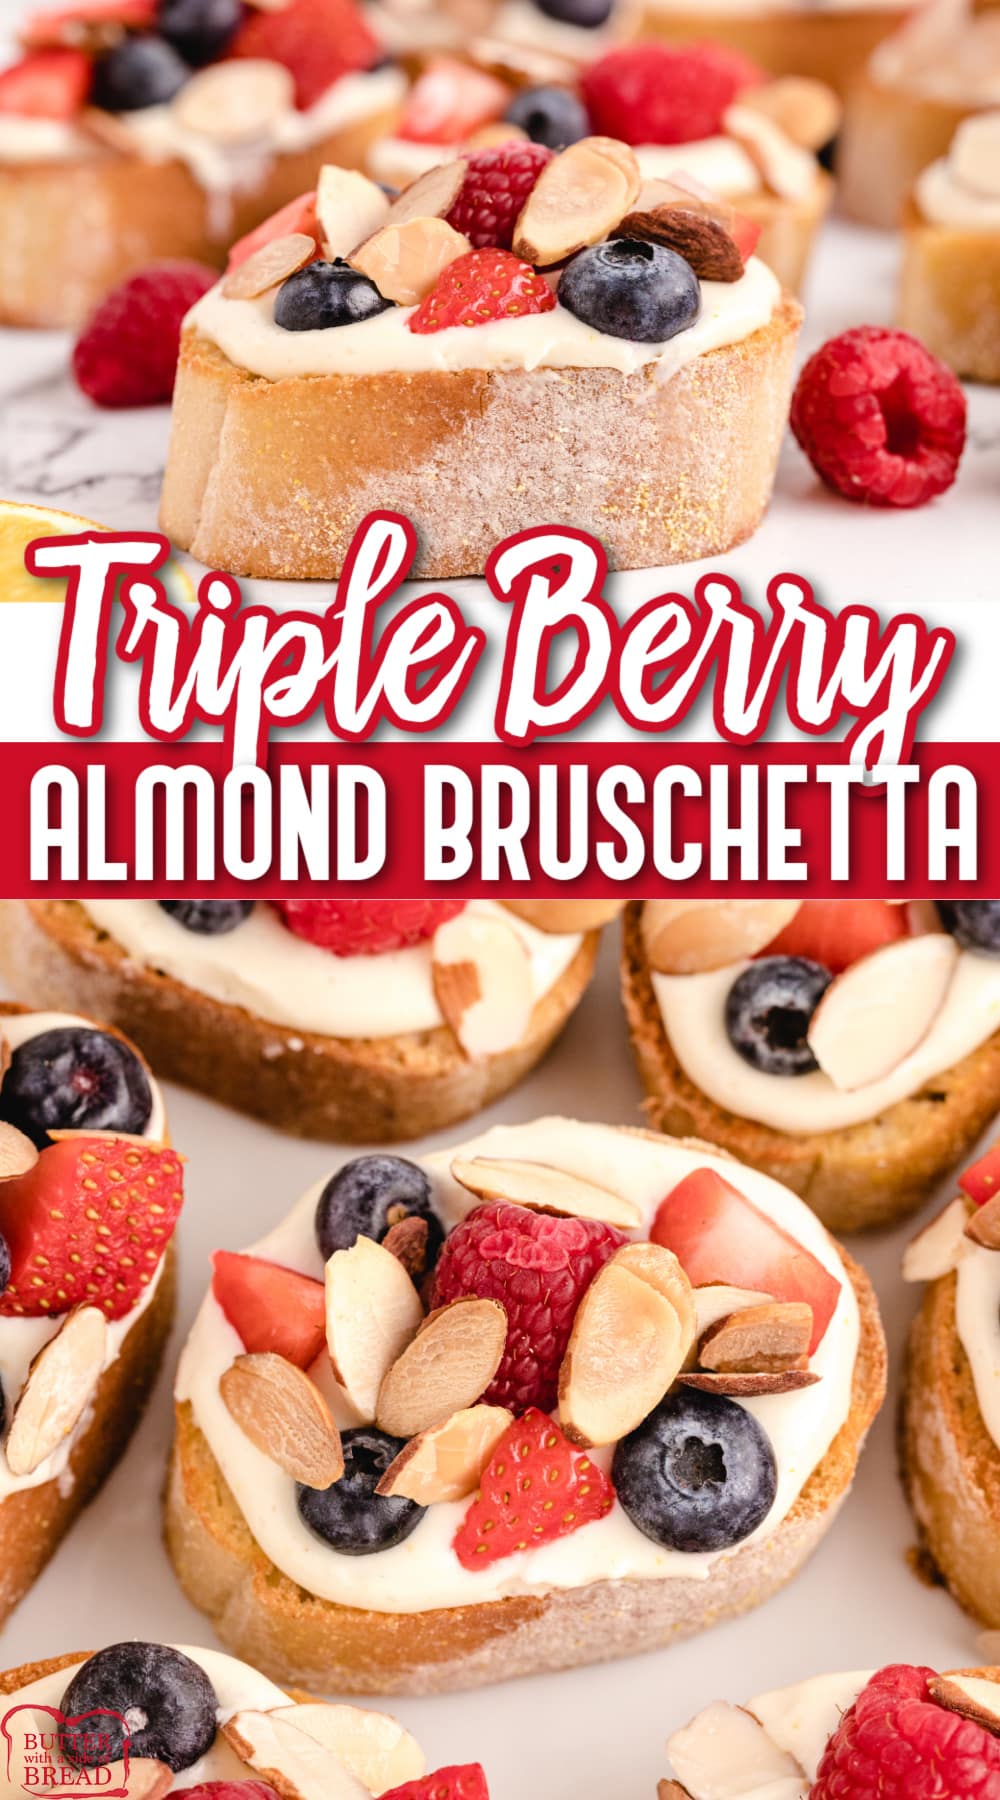 Triple Berry Almond Bruschetta is a delectable snack made with a creamy topping and fresh berries. Making this fresh berry bruschetta is so simple - in under 30 minutes you will have a sensational dish to serve and impress your family or friends! 